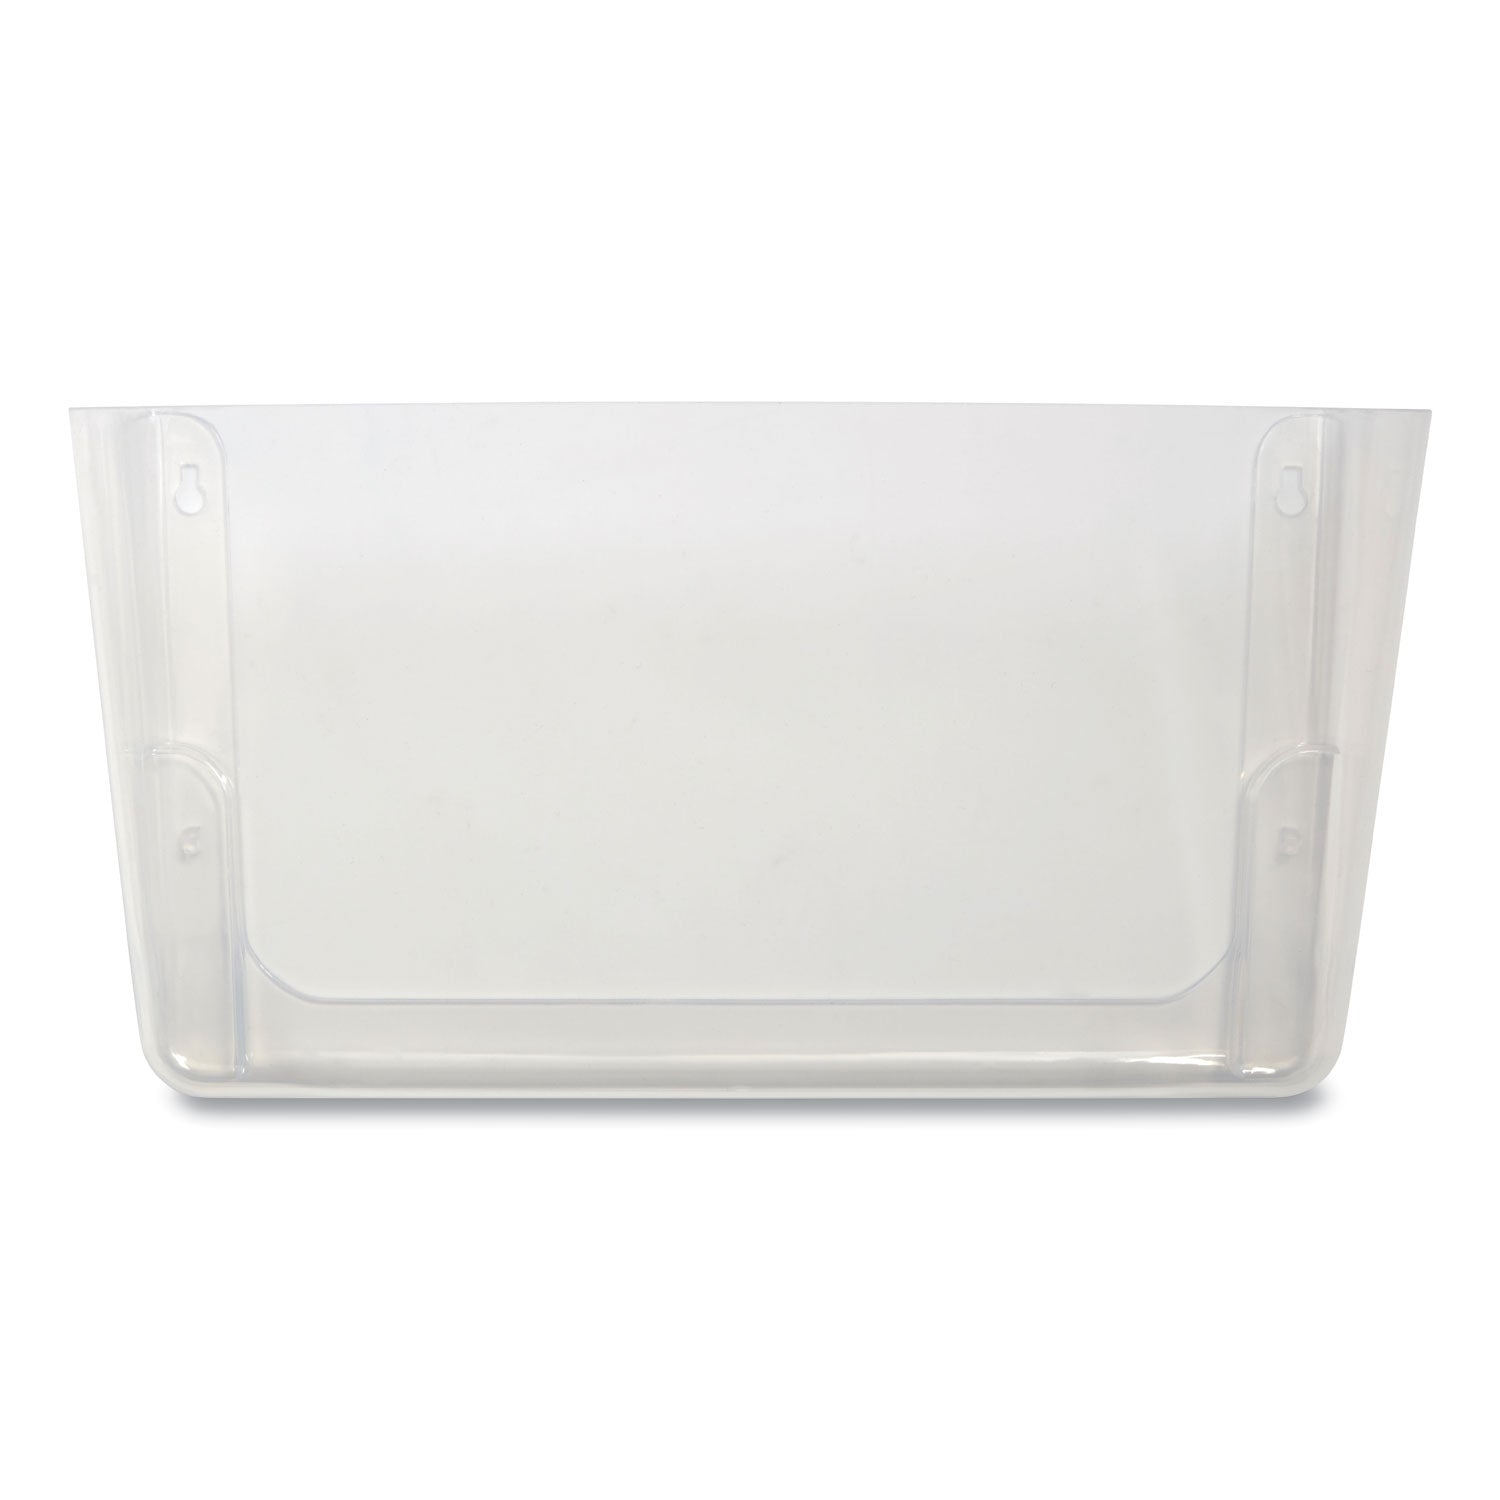 unbreakable-plastic-wall-file-letter-size-13-x-369-x-716-clear_tud24380809 - 1